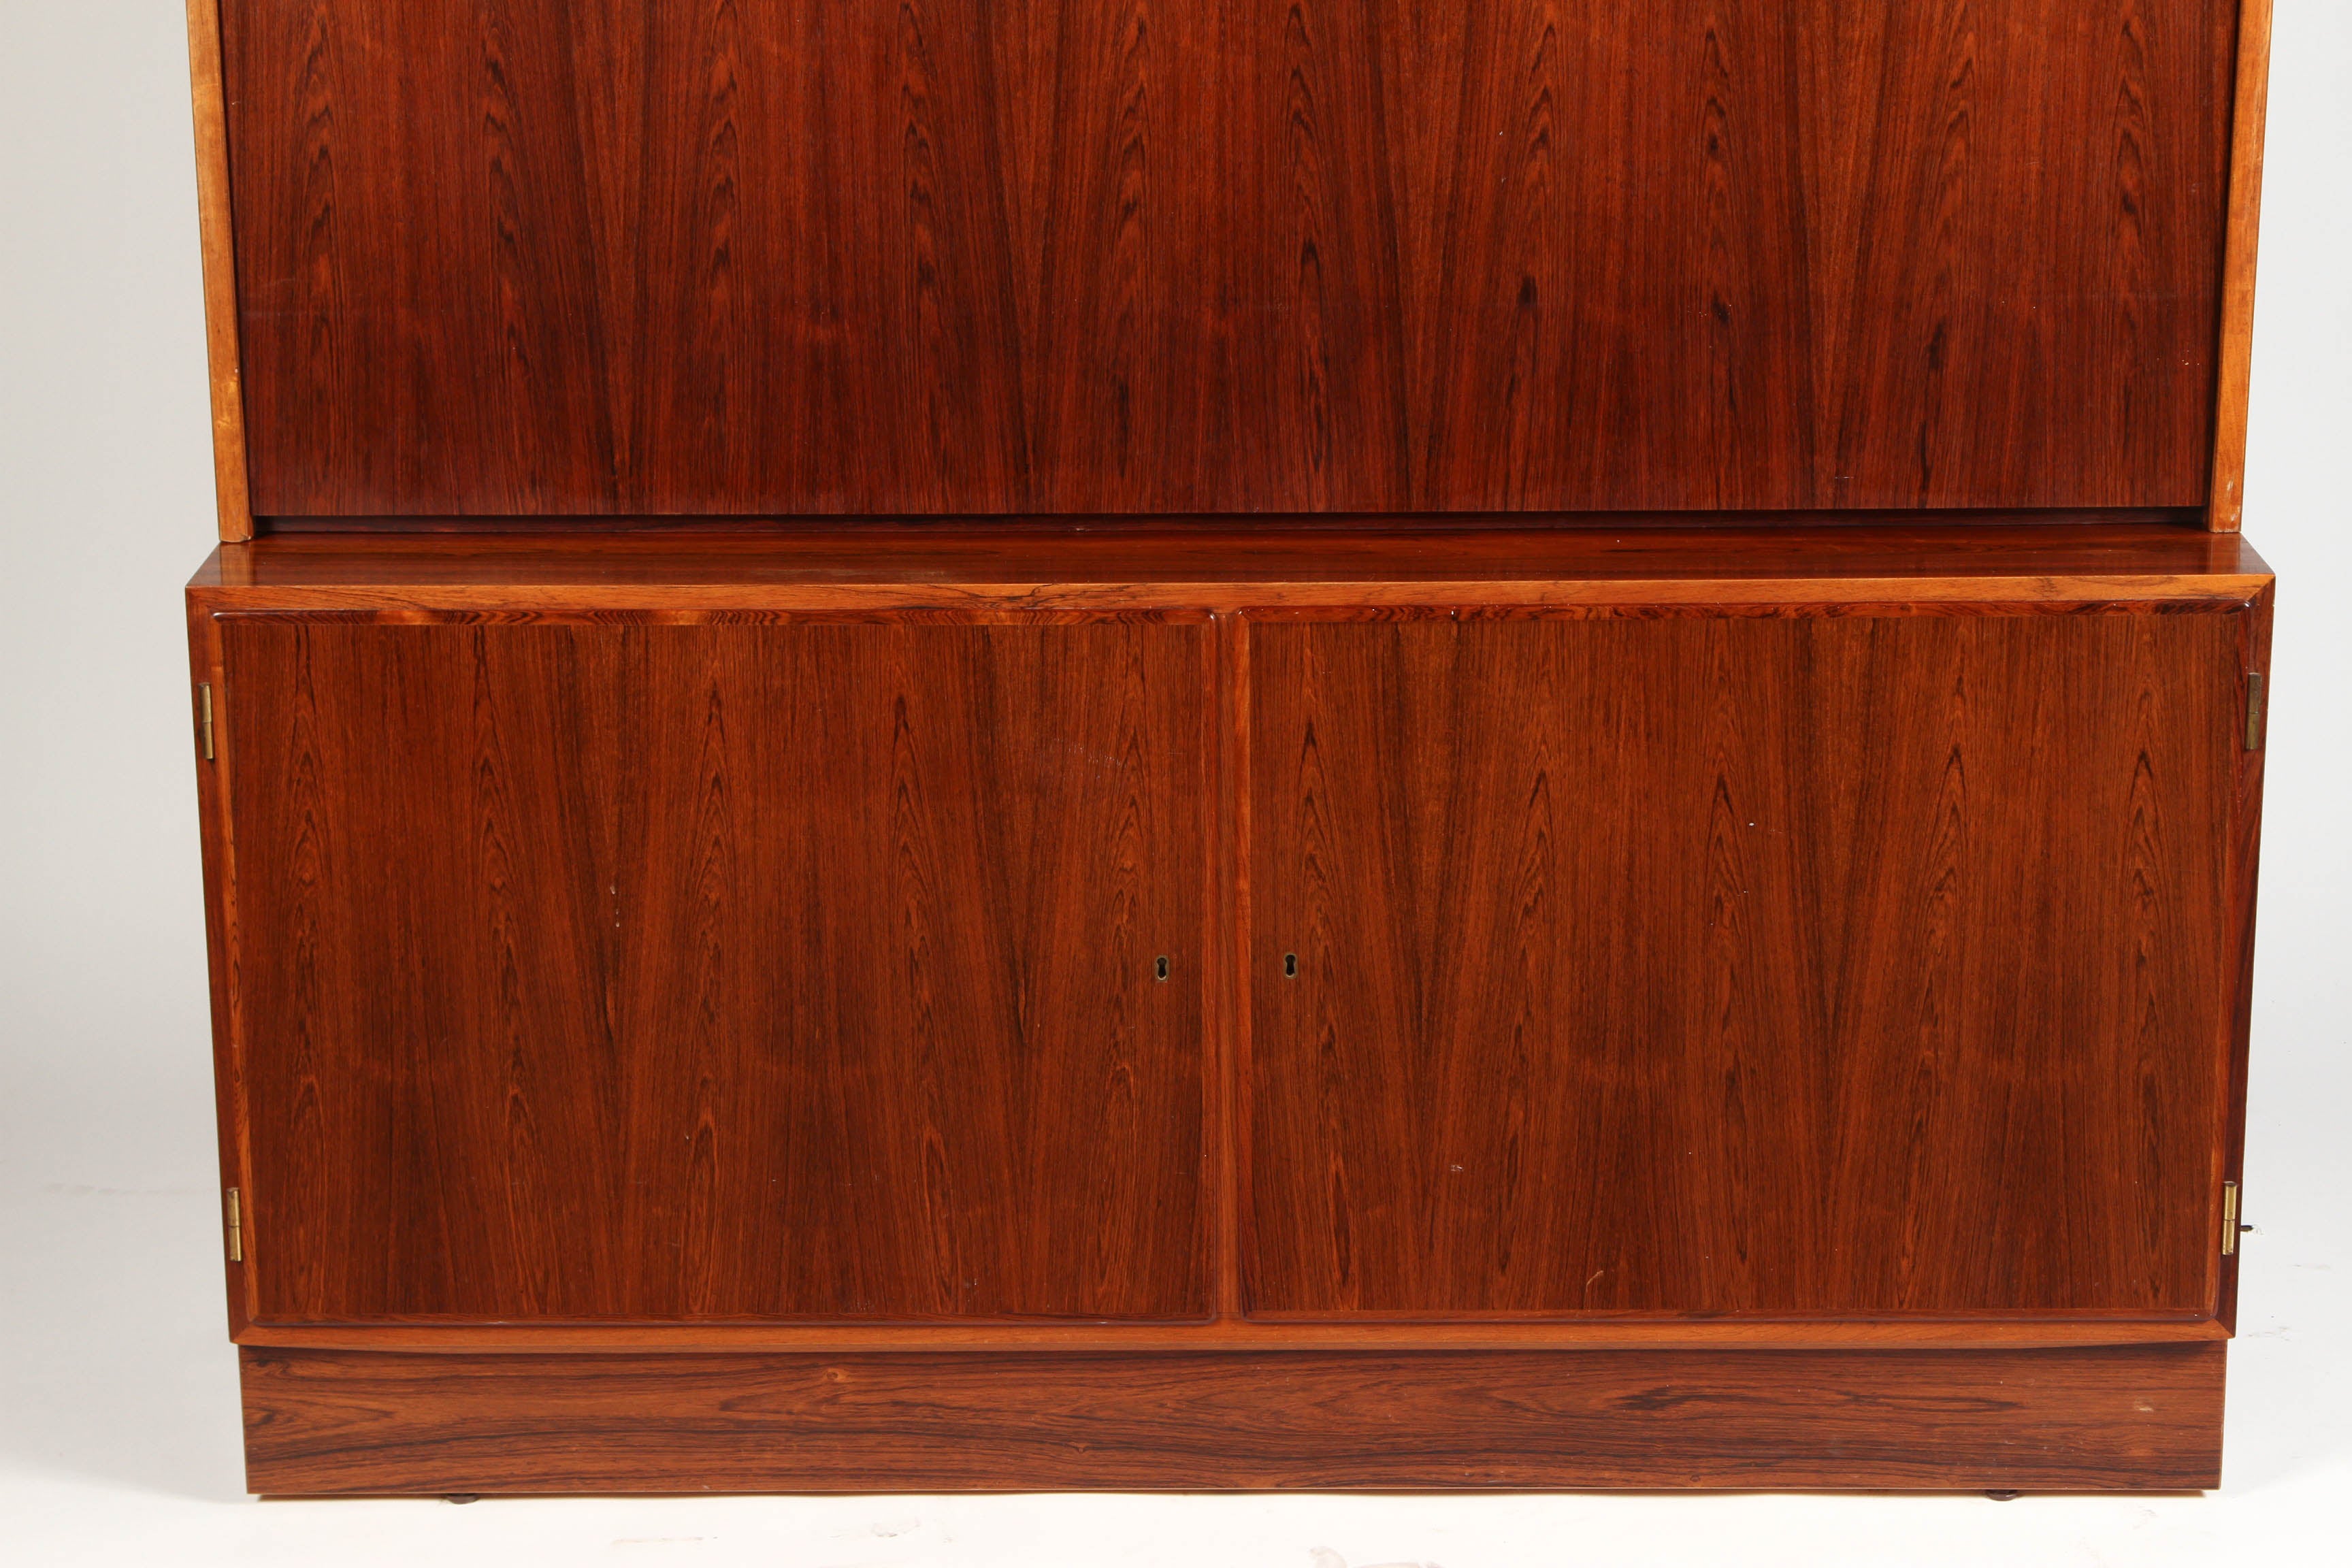 A 1970s Danish palisander rosewood desk with adjustable shelves on the inside, both below and above the working surface of the desk. The center cabinet door folds down to be the writing surface.